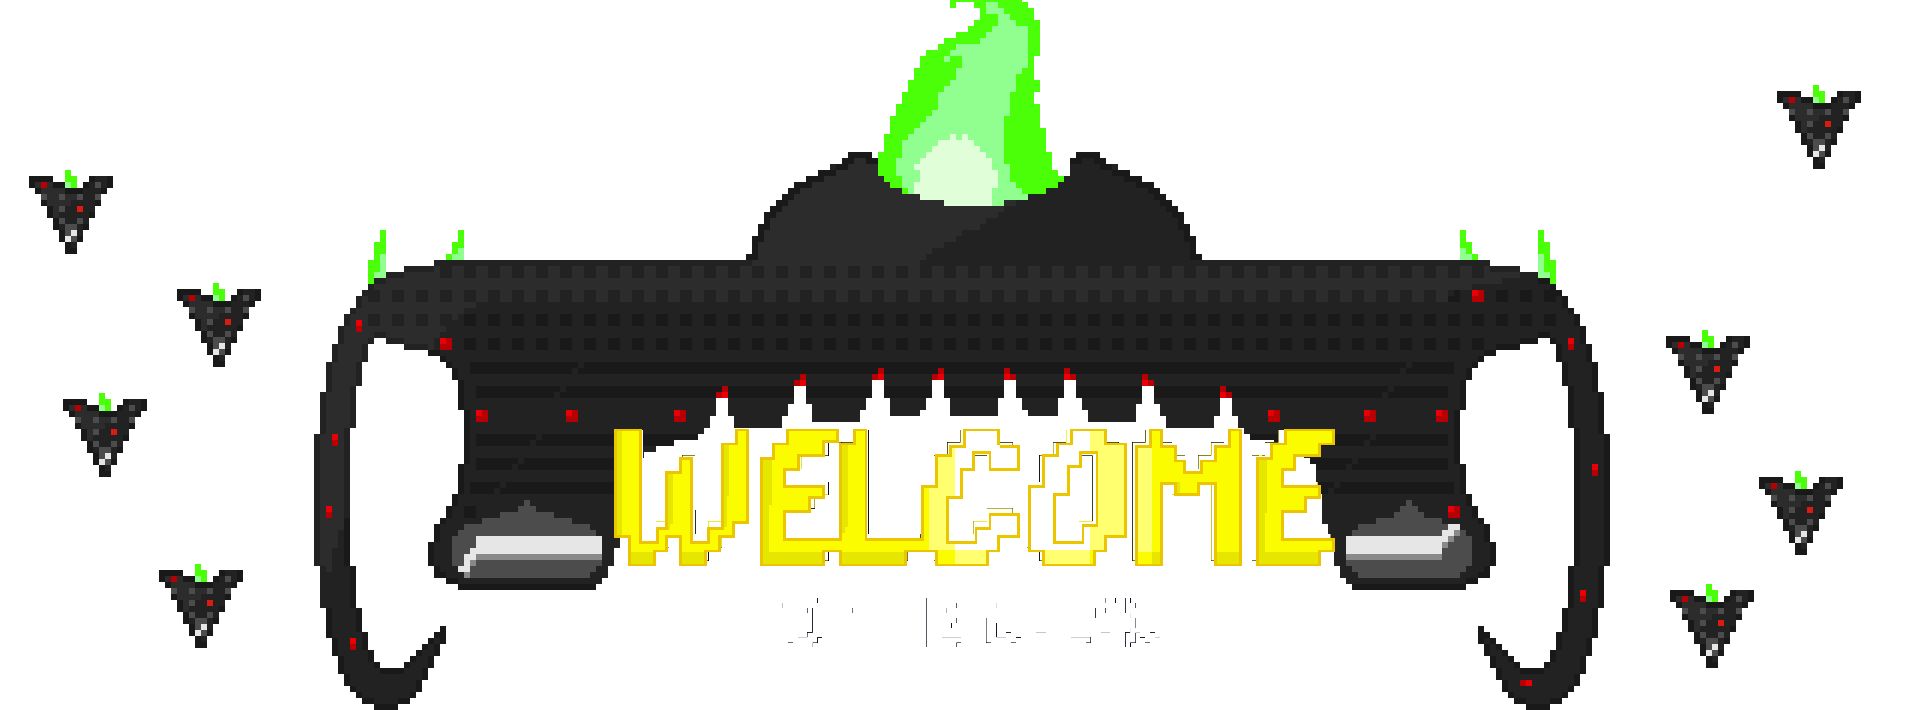 Welcome to the Galaxy